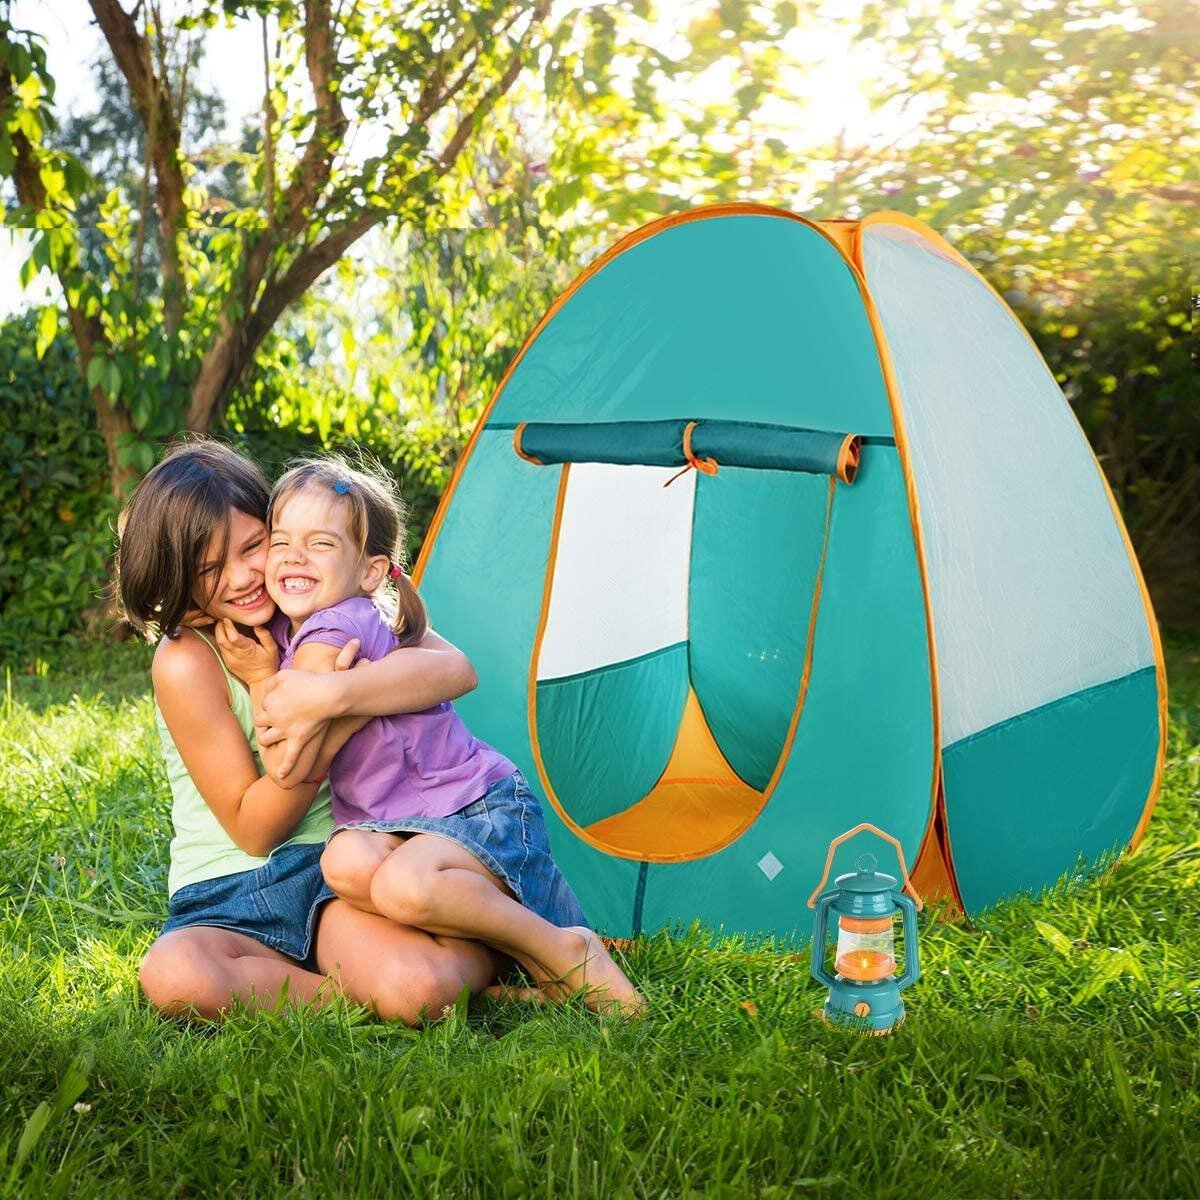 Star Explorer Kid's Pop Up Tent for Hours of Fun and Imagination NEW 